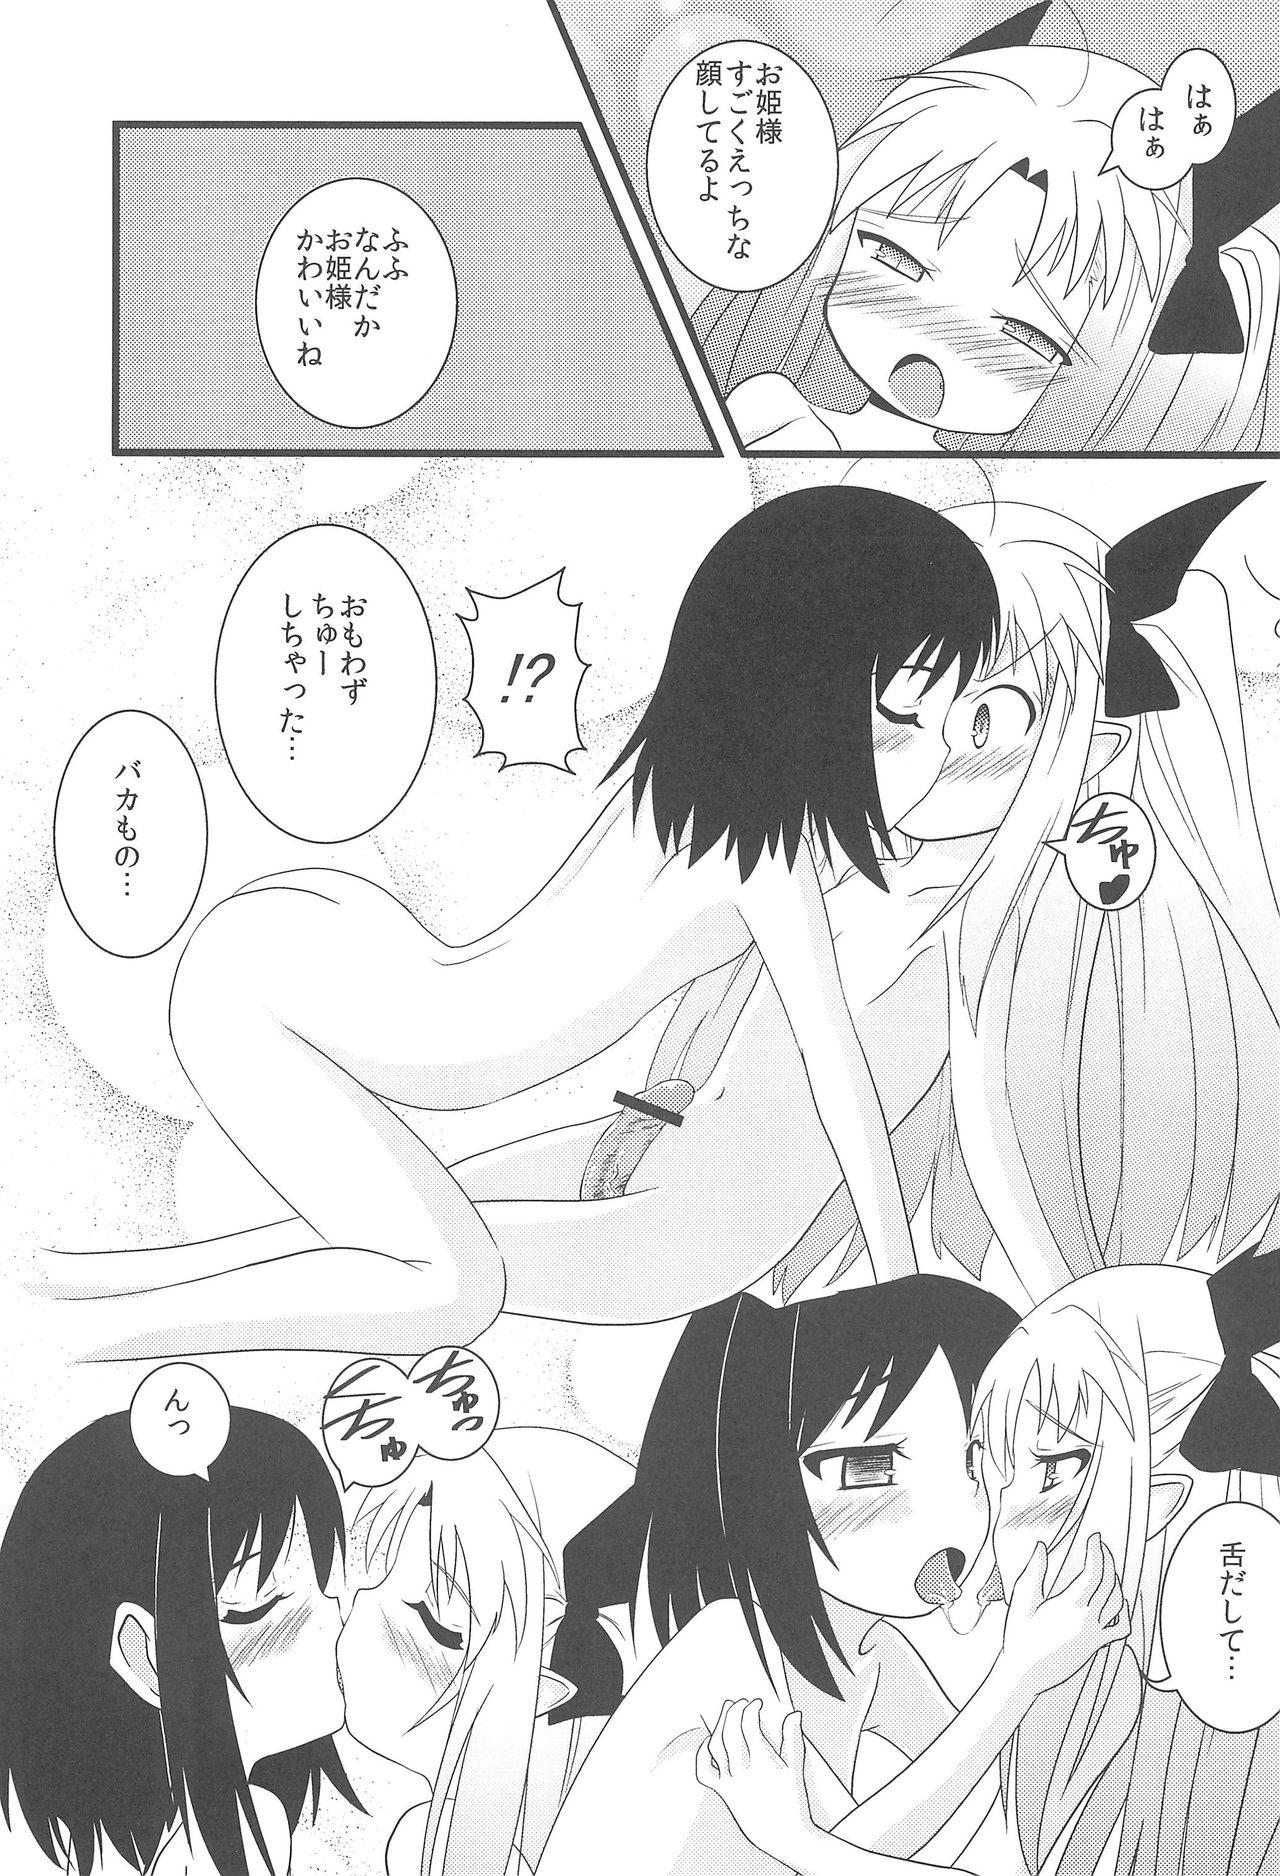 Pussyeating Lotte no Choco Pie - Lotte no omocha Her - Page 7